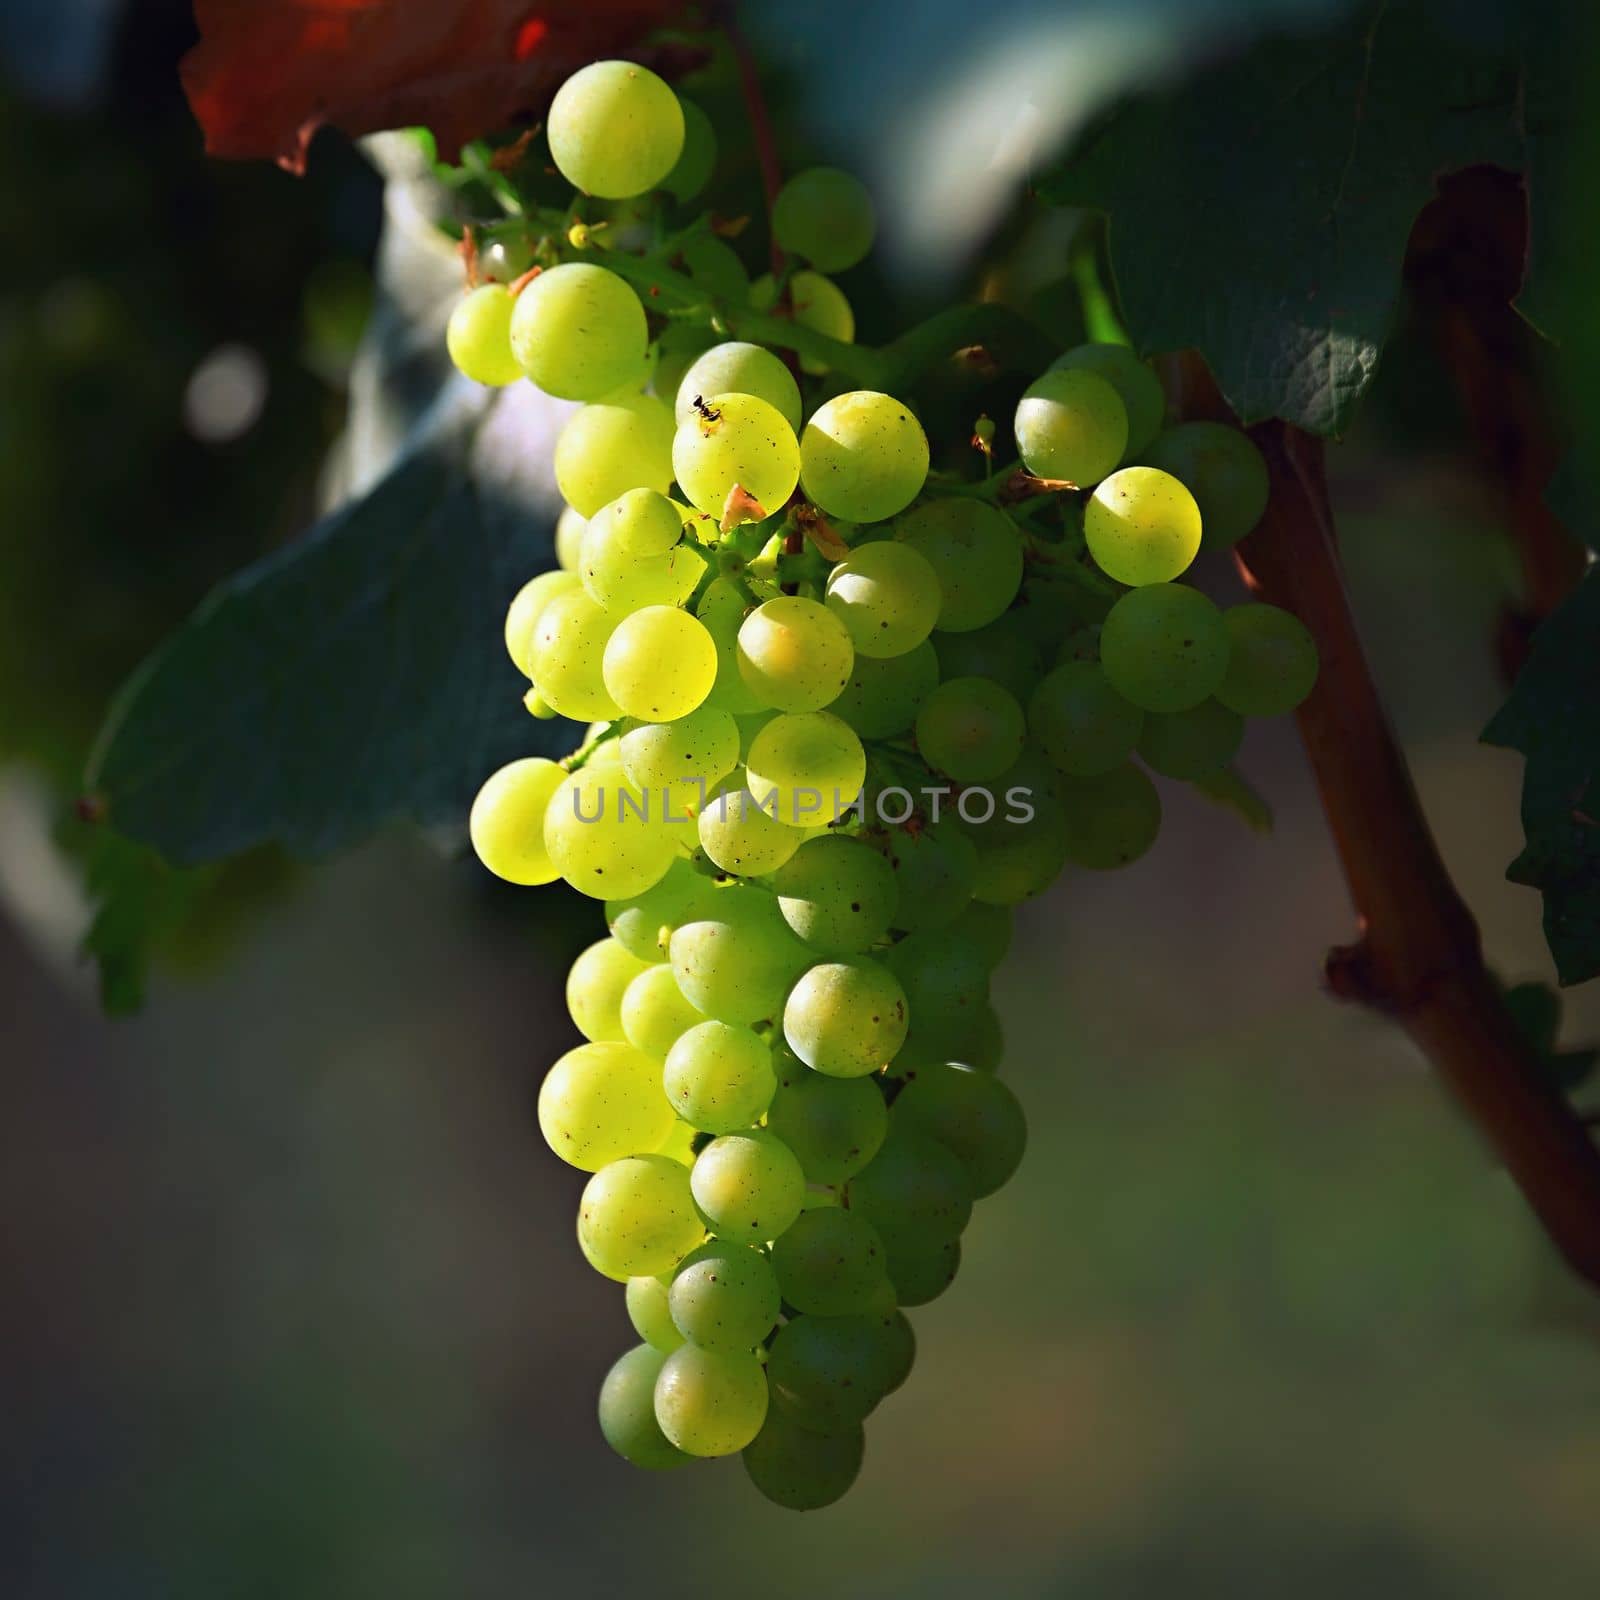 Beautiful fresh fruit - grapes growing in a vineyard. Harvest time - autumn fruit collection. South Moravian wine region - Palava - Czech Republic. by Montypeter